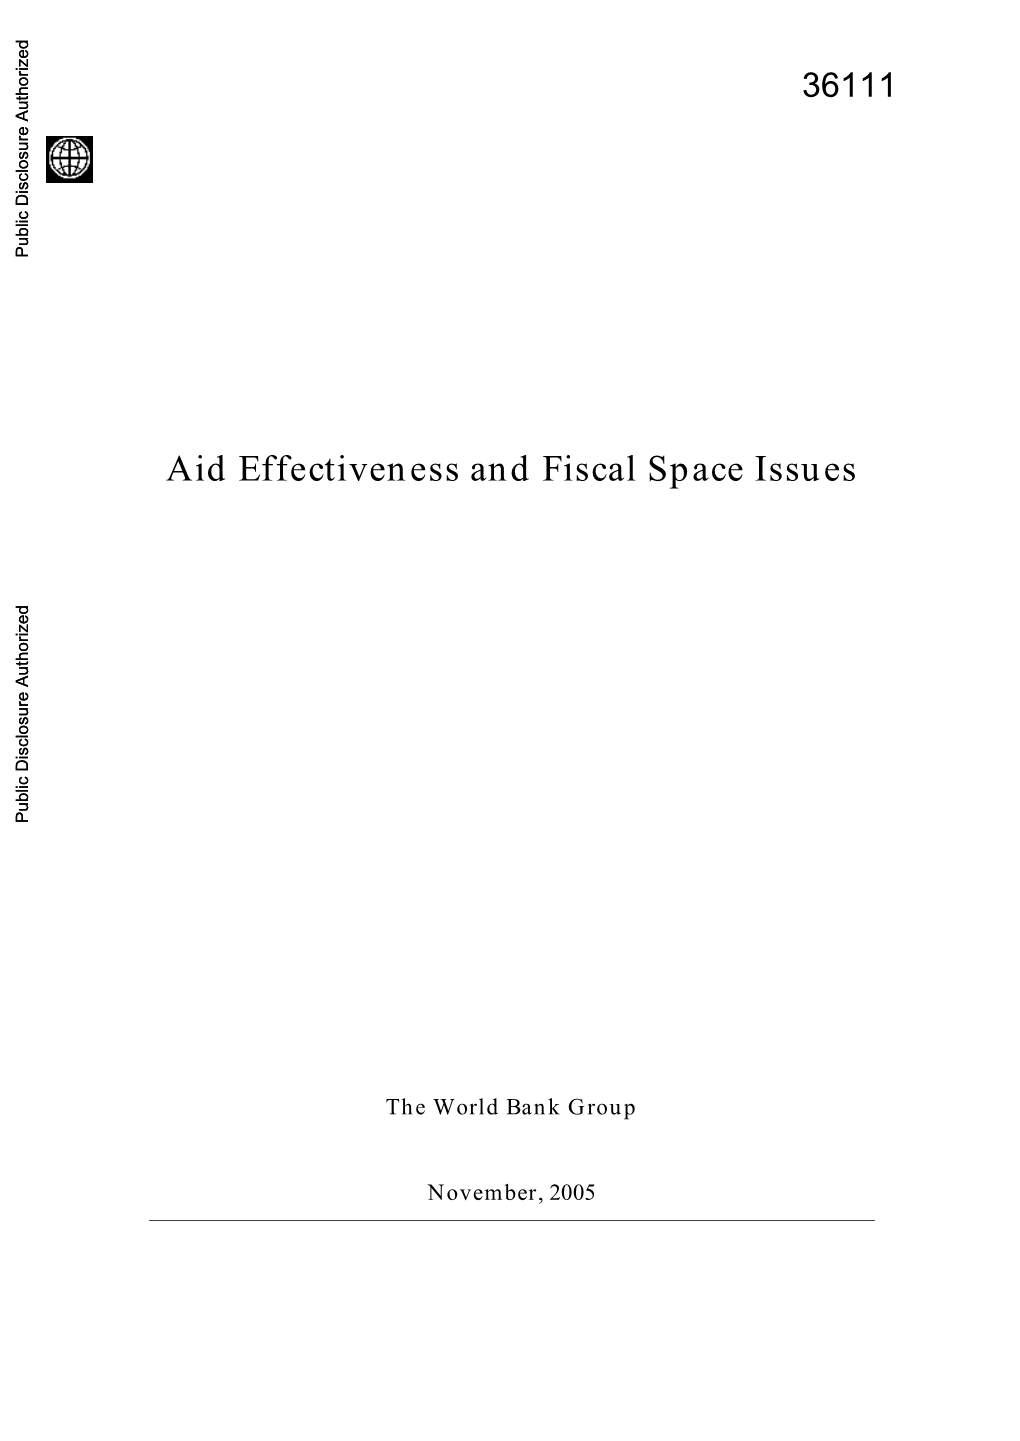 Aid Effectiveness and Fiscal Space Issues